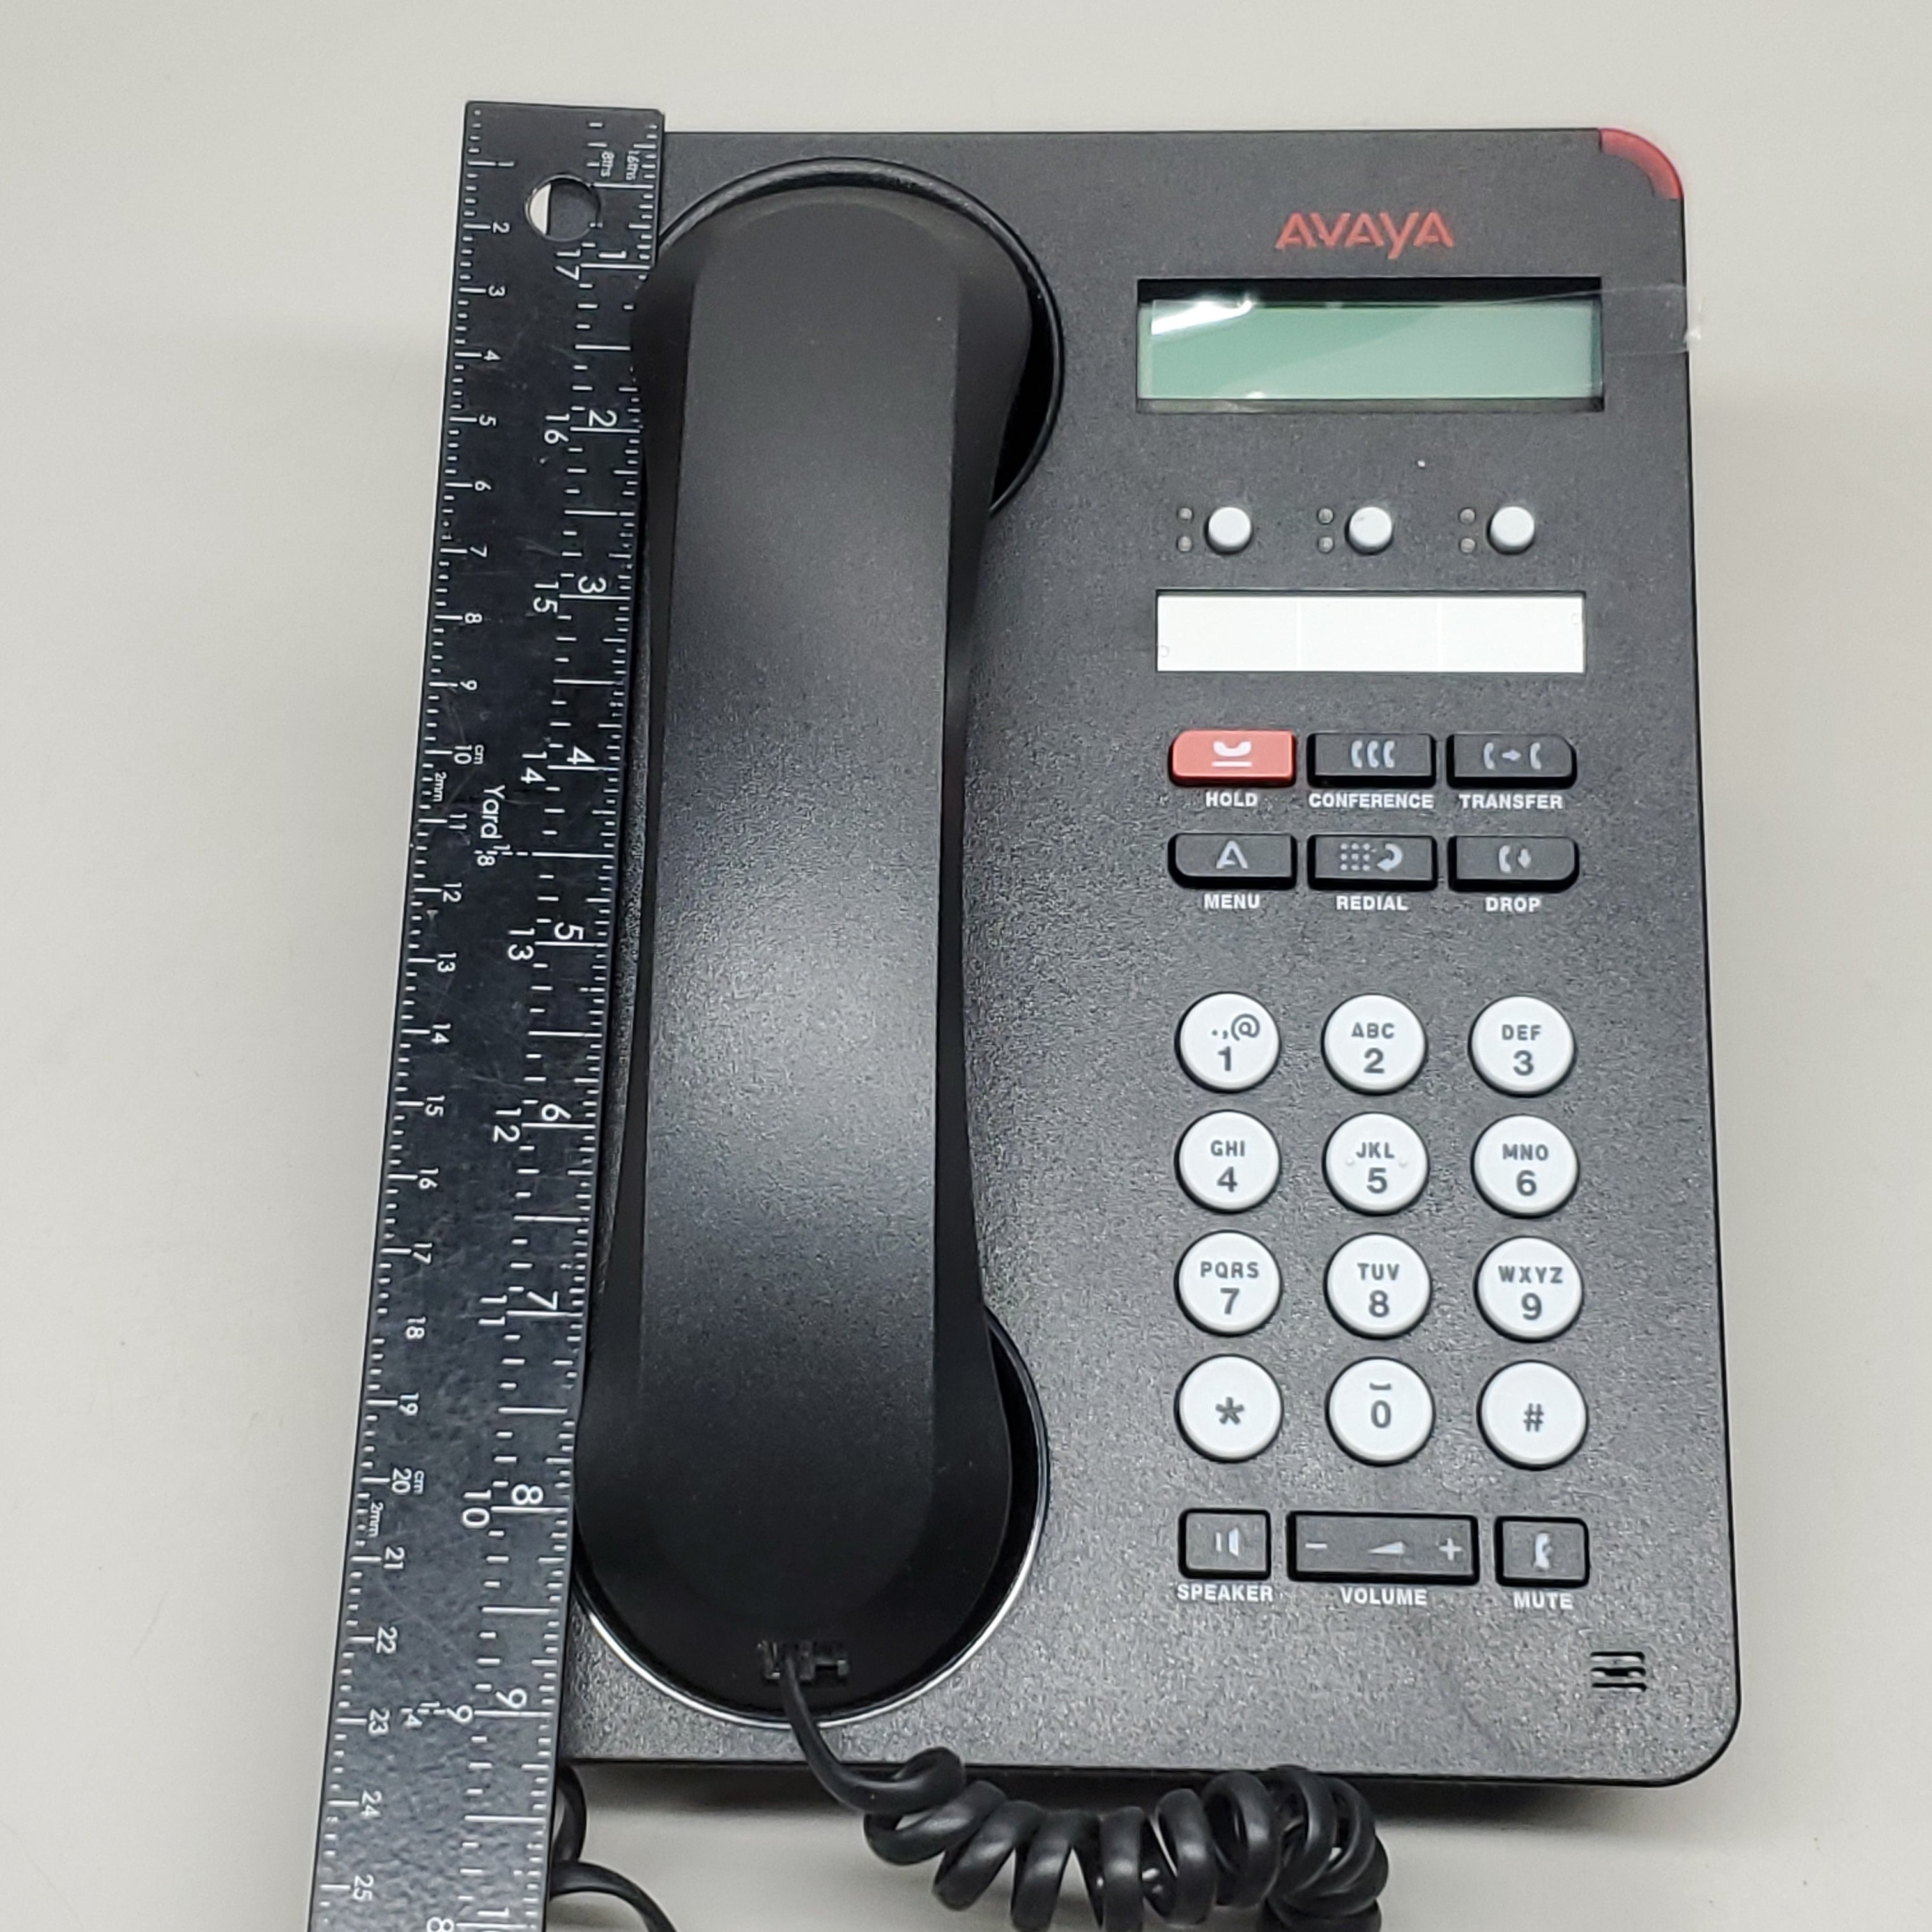 ZA@ Lot of 33 AVAYA 1603-I Office IP Desk Phones 700476849 (Pre-Owned AS-IS)